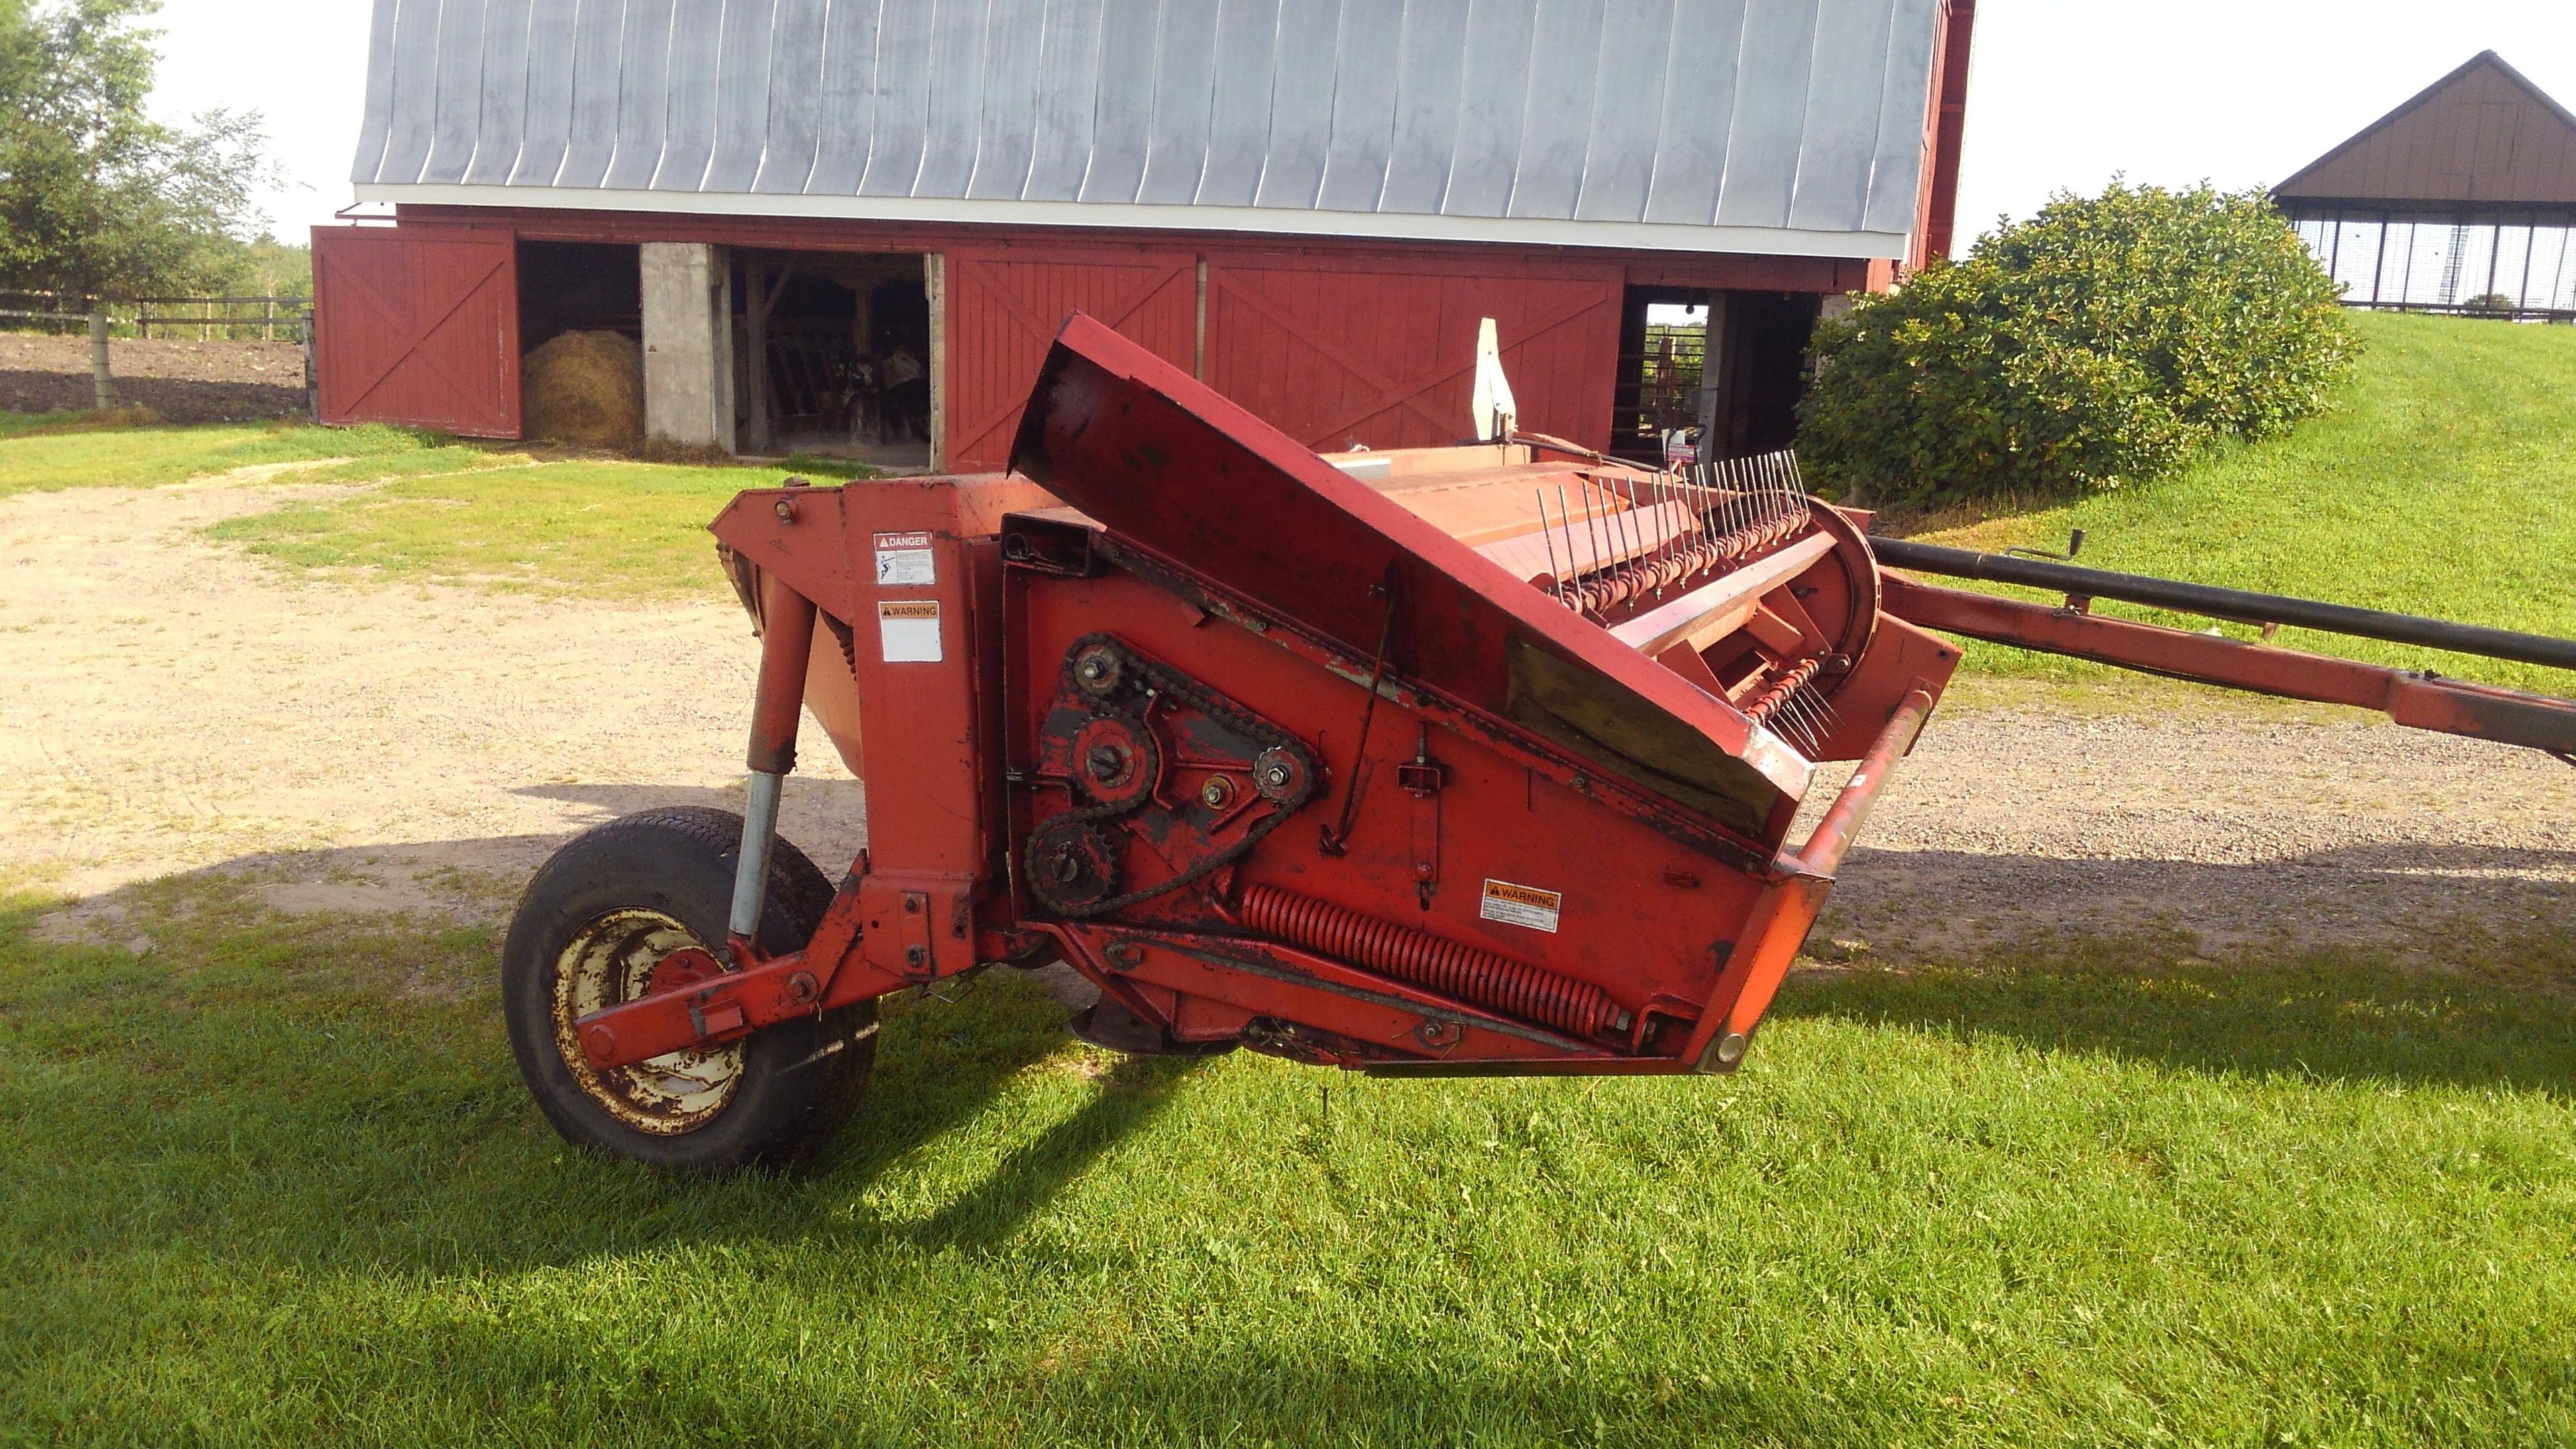 Gehl 2170 haybine. Good working condition. Replaced this season: new sickle